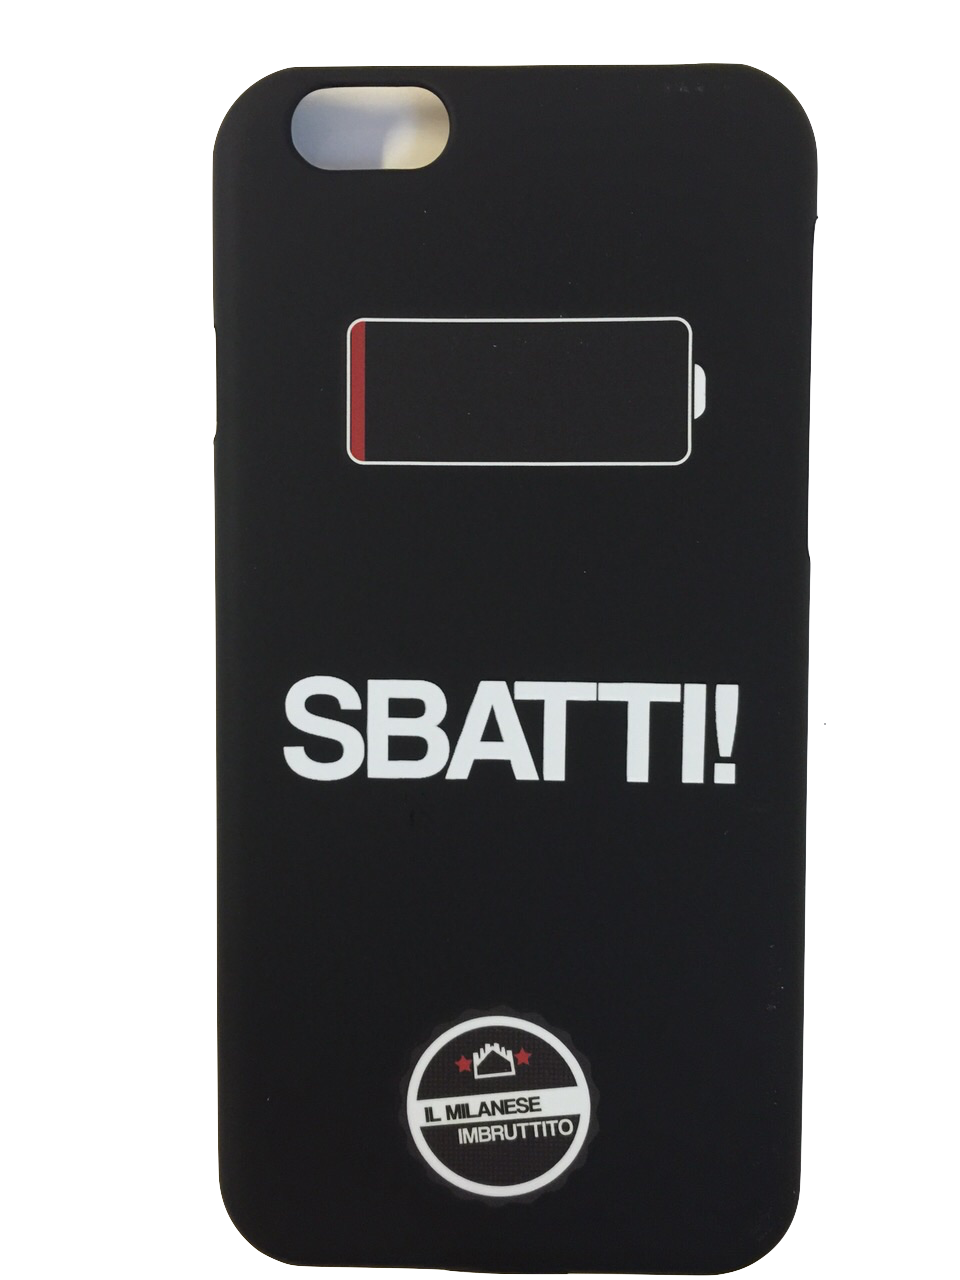 cover milanese imbruttito iphone 6s